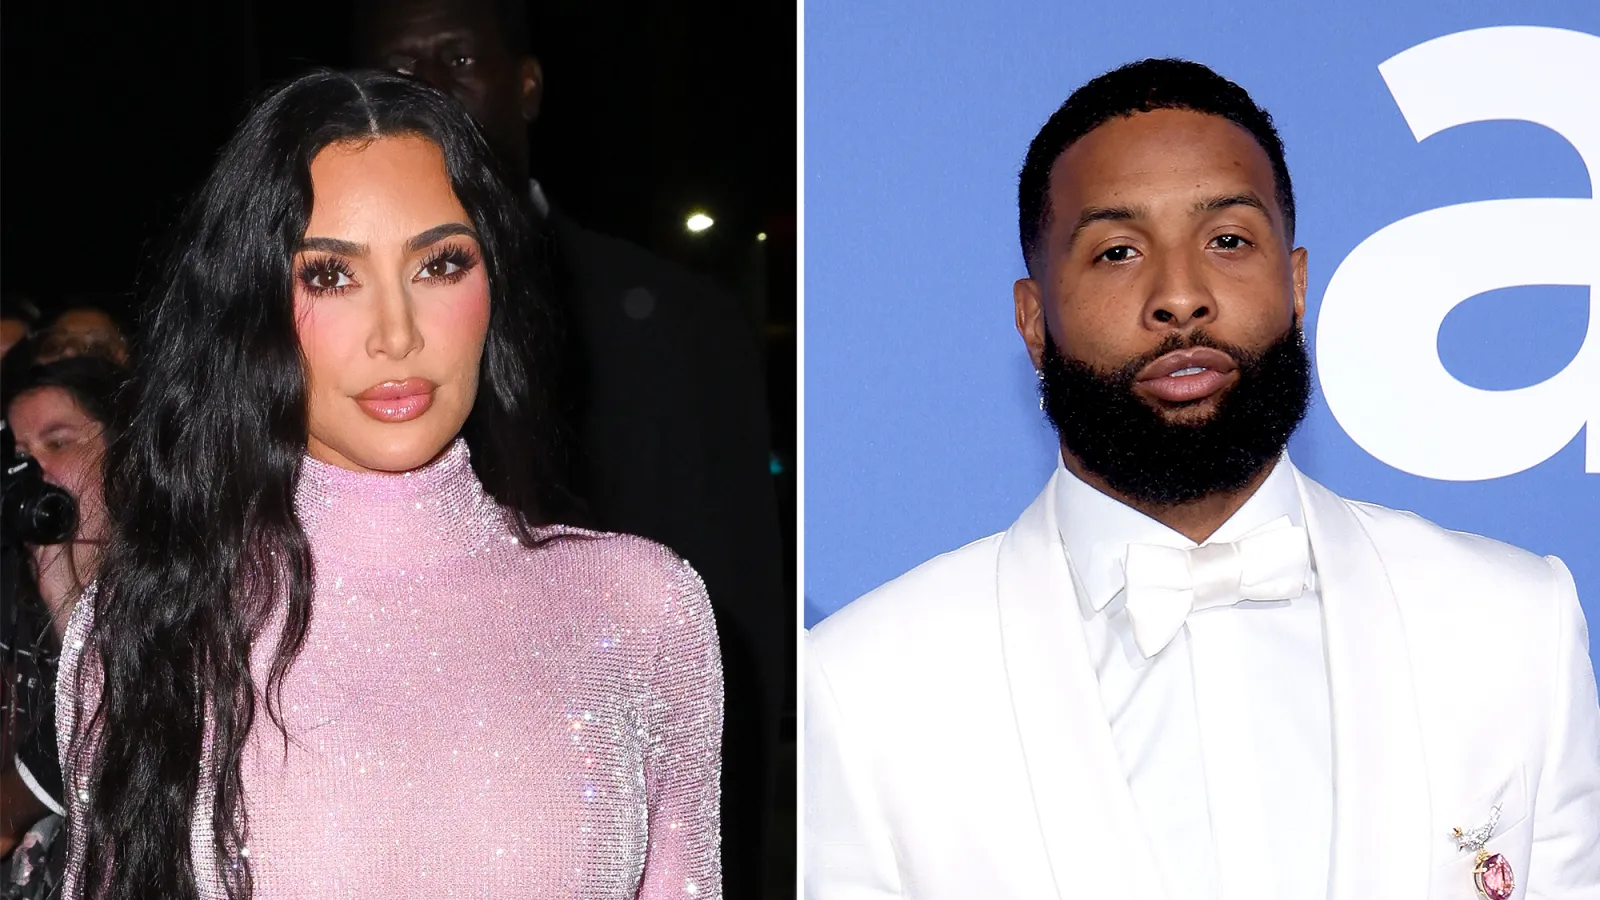 Photos of Kim Kardashian And Odell Beckham Jr.’s Partying Together on His Birthday